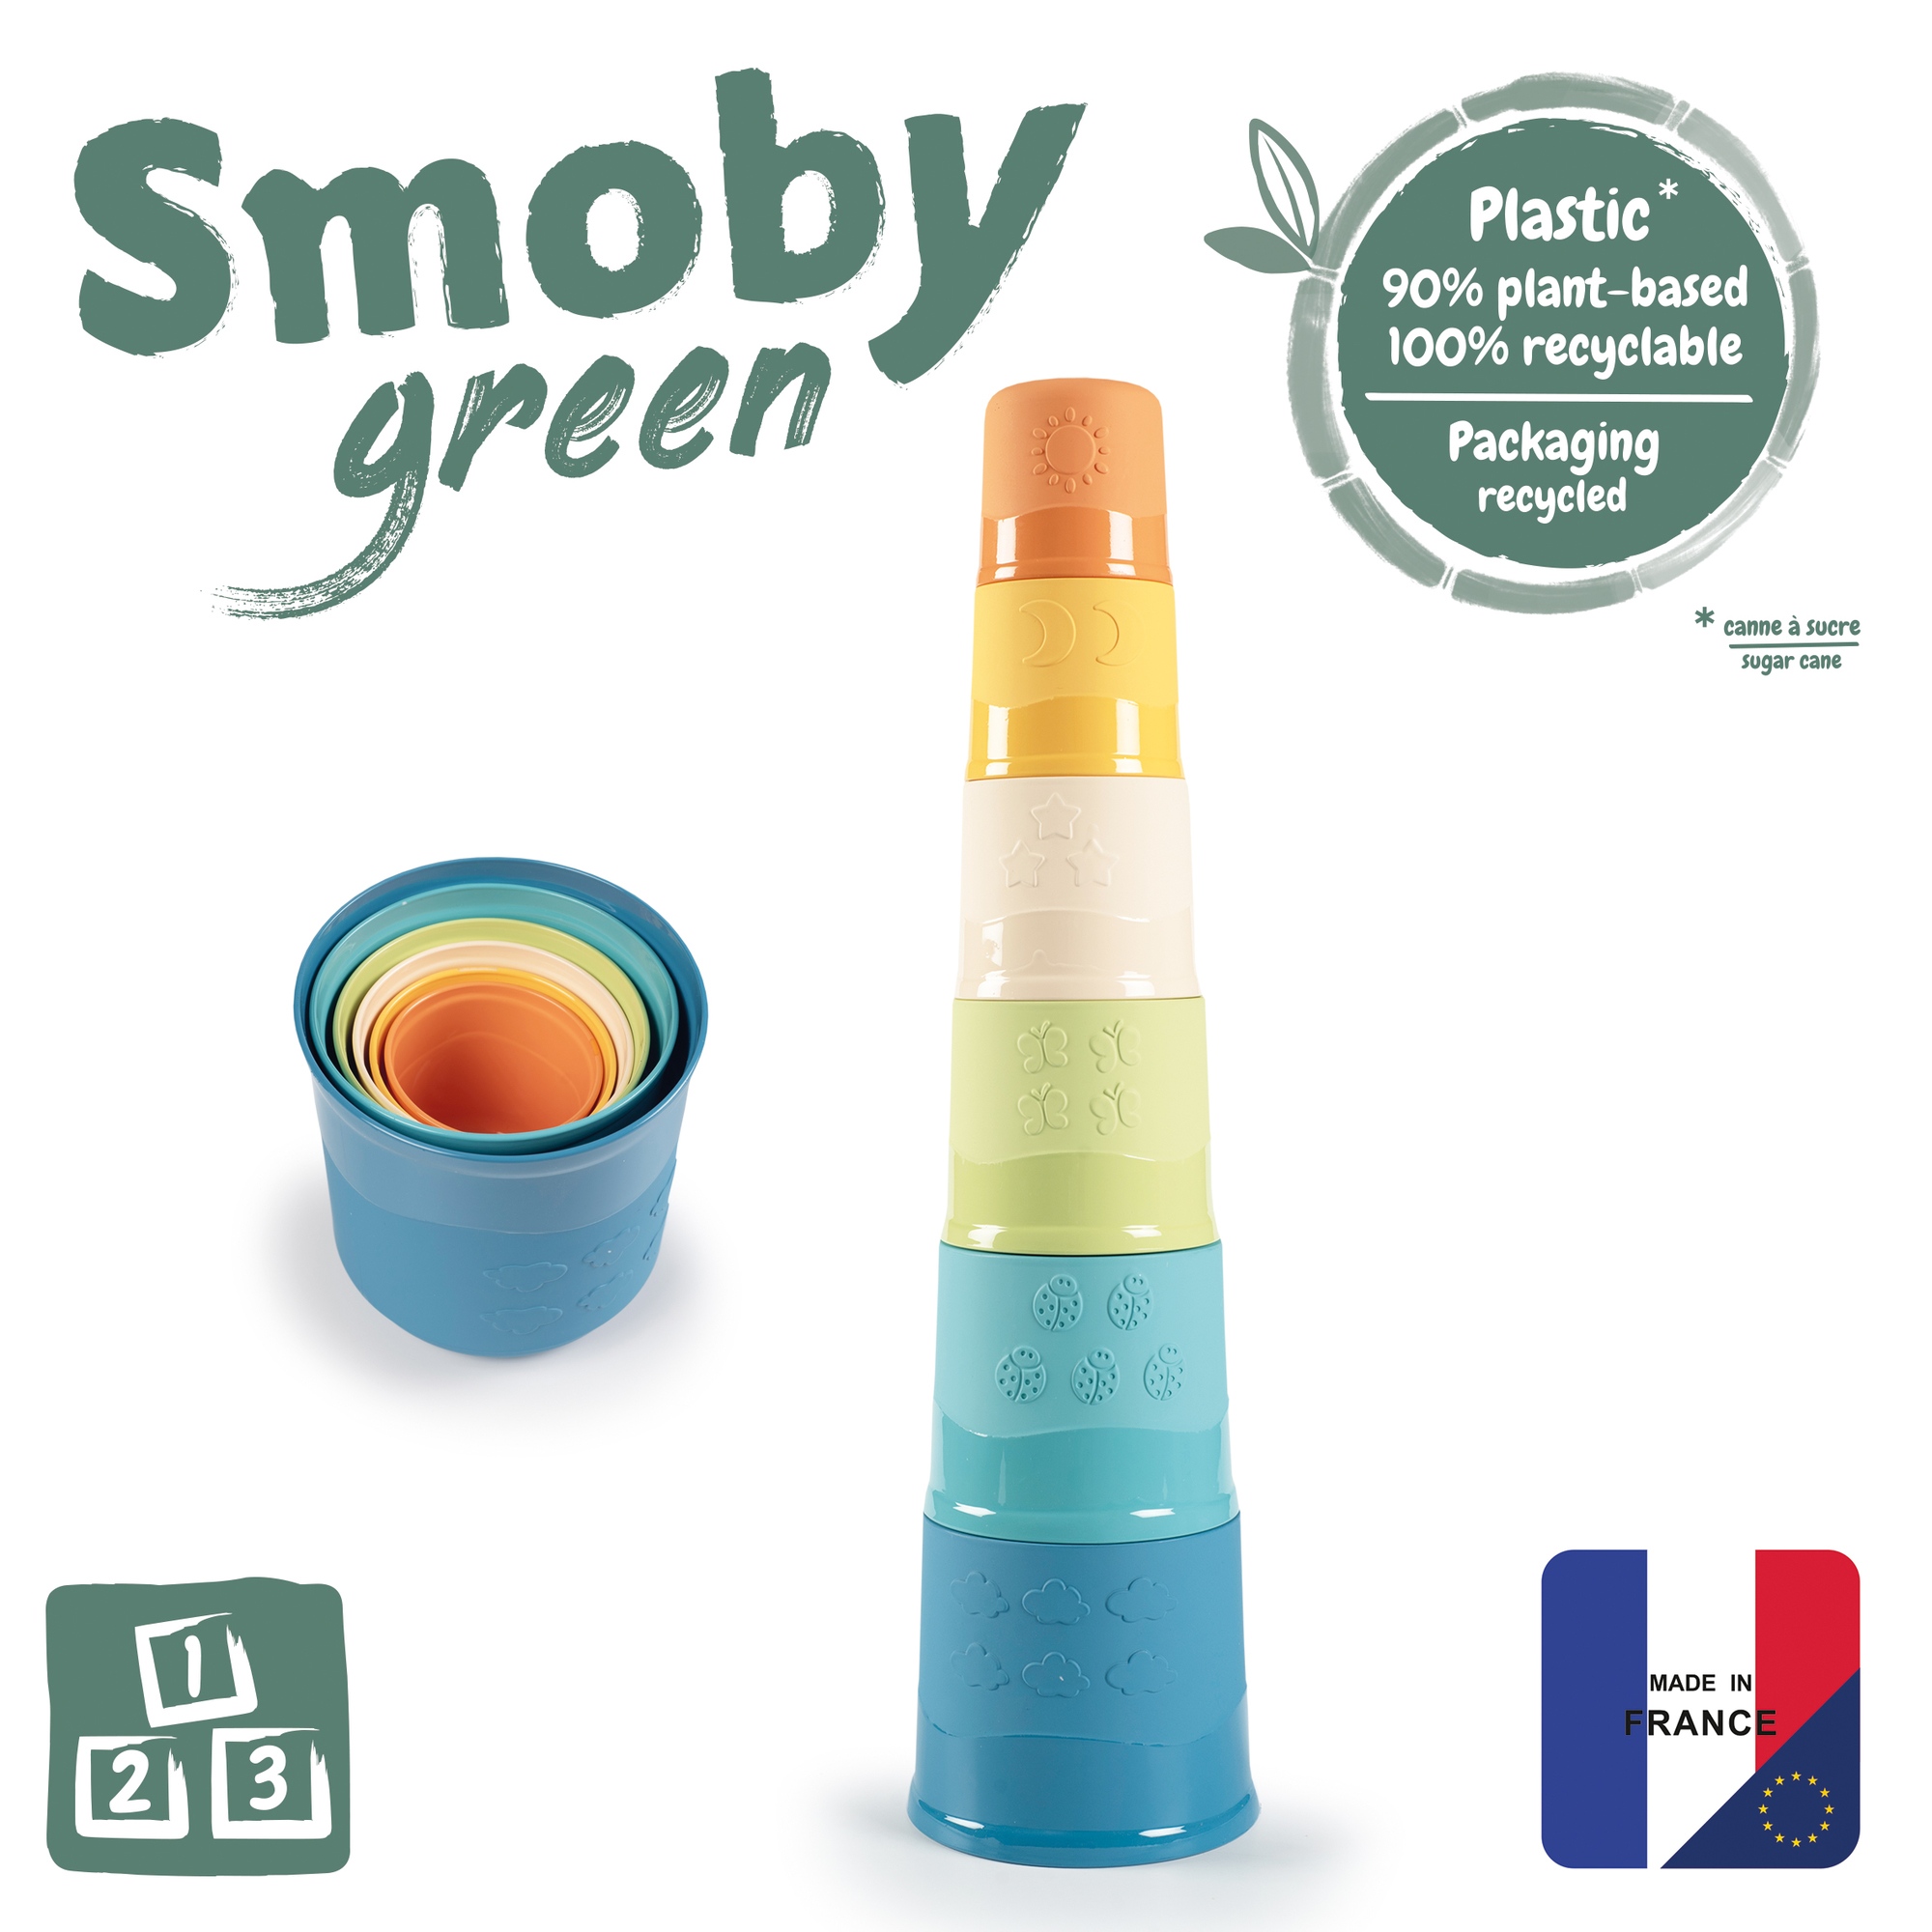 SMOBY Green Magic Spielset Mehrfarbig Stapelbecher Tower